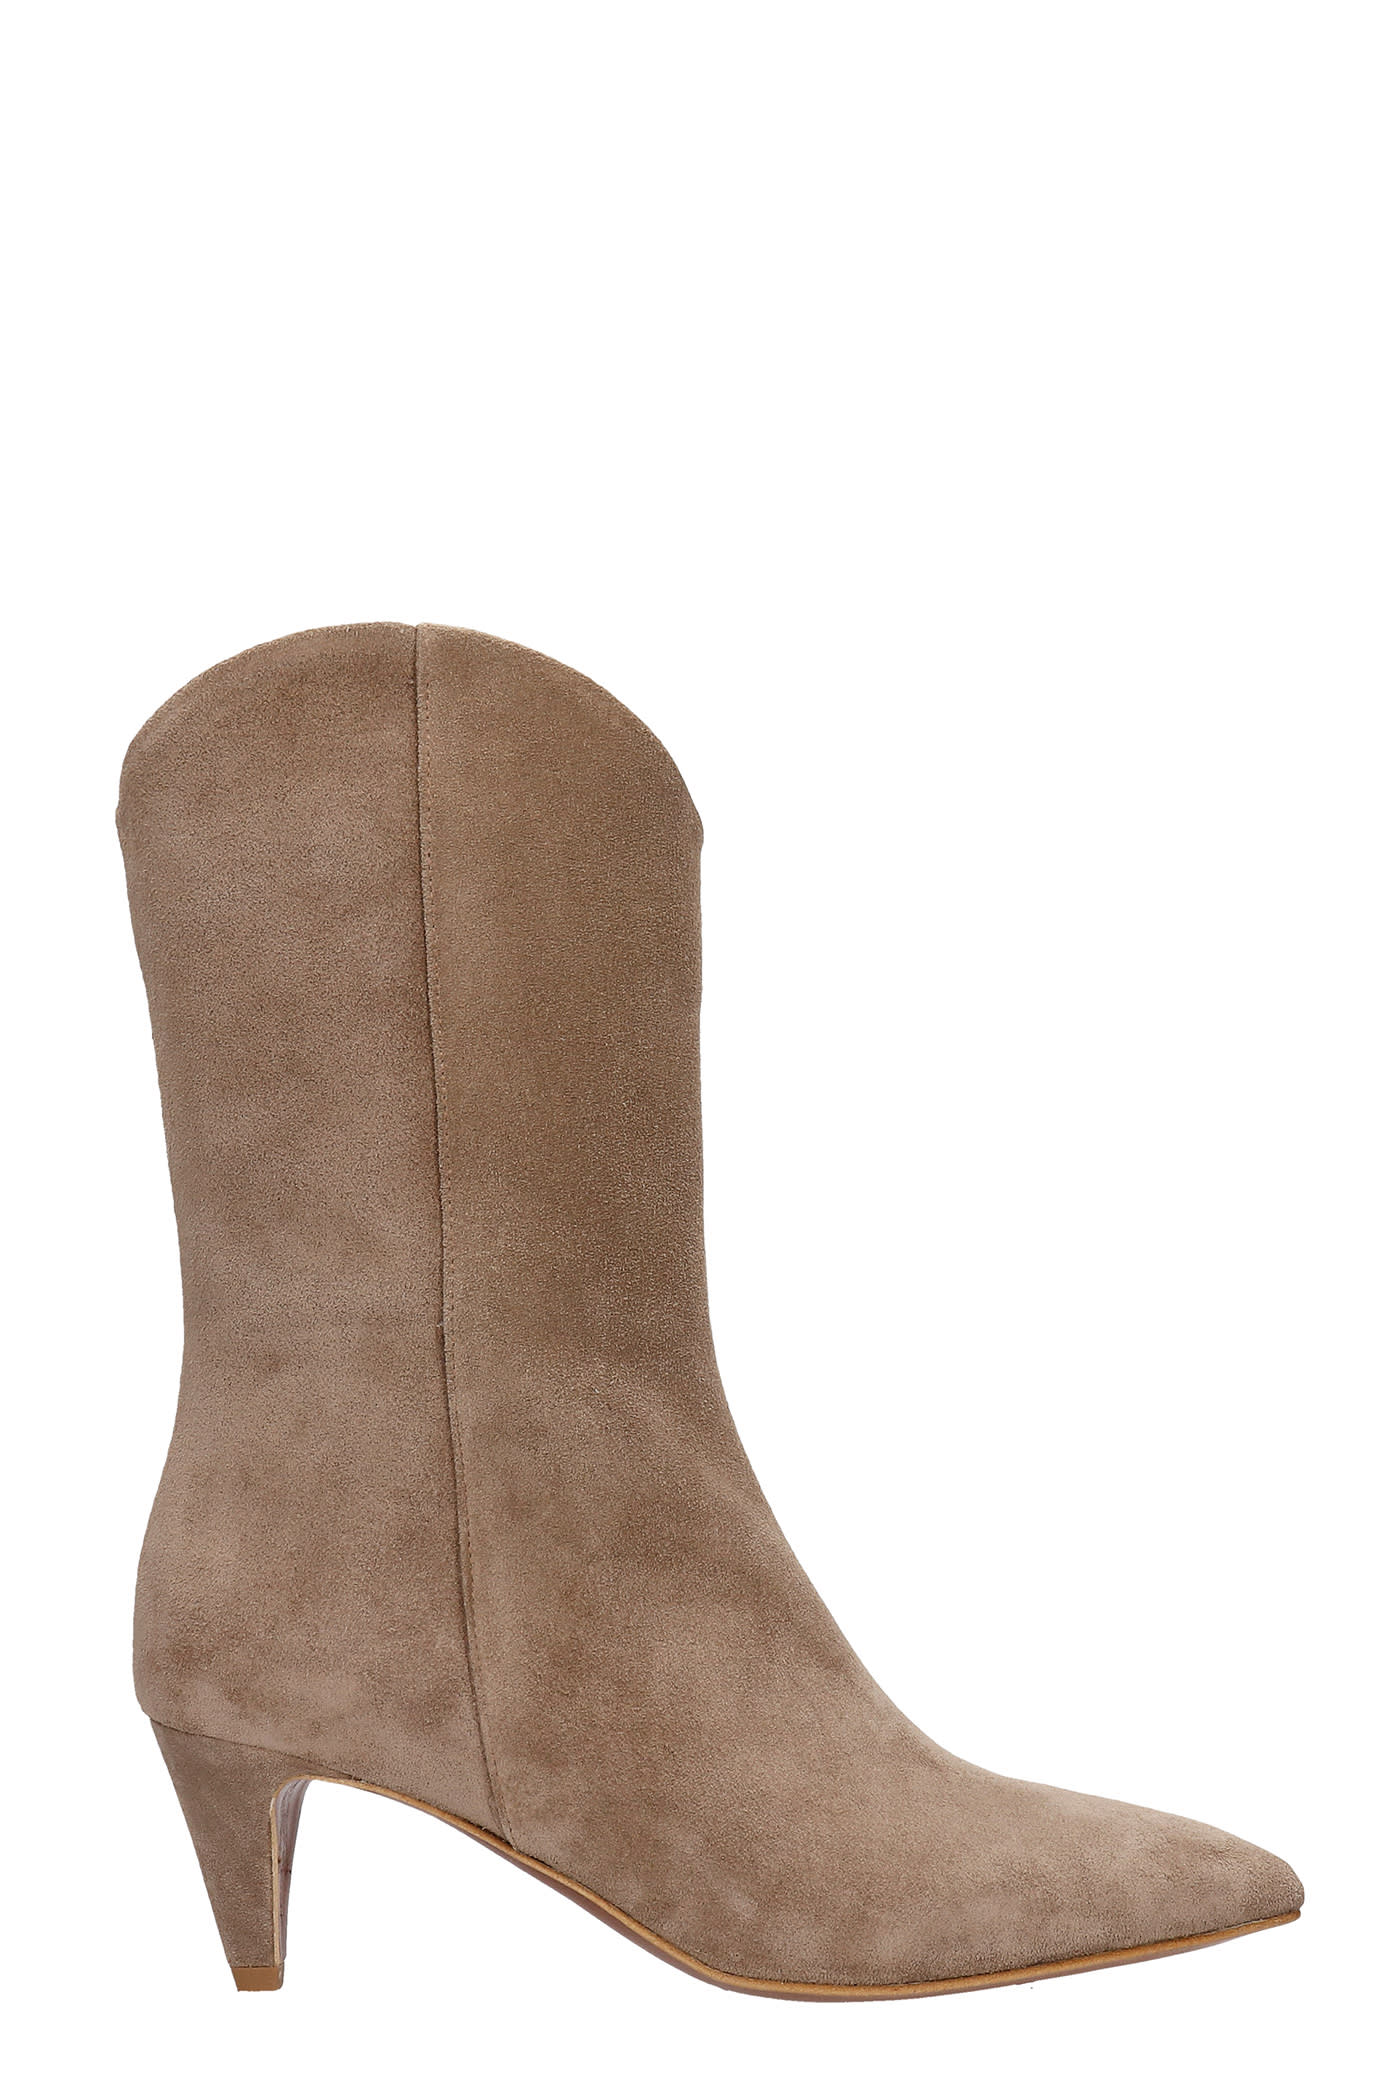 Julie Dee High Heels Ankle Boots In Taupe Suede